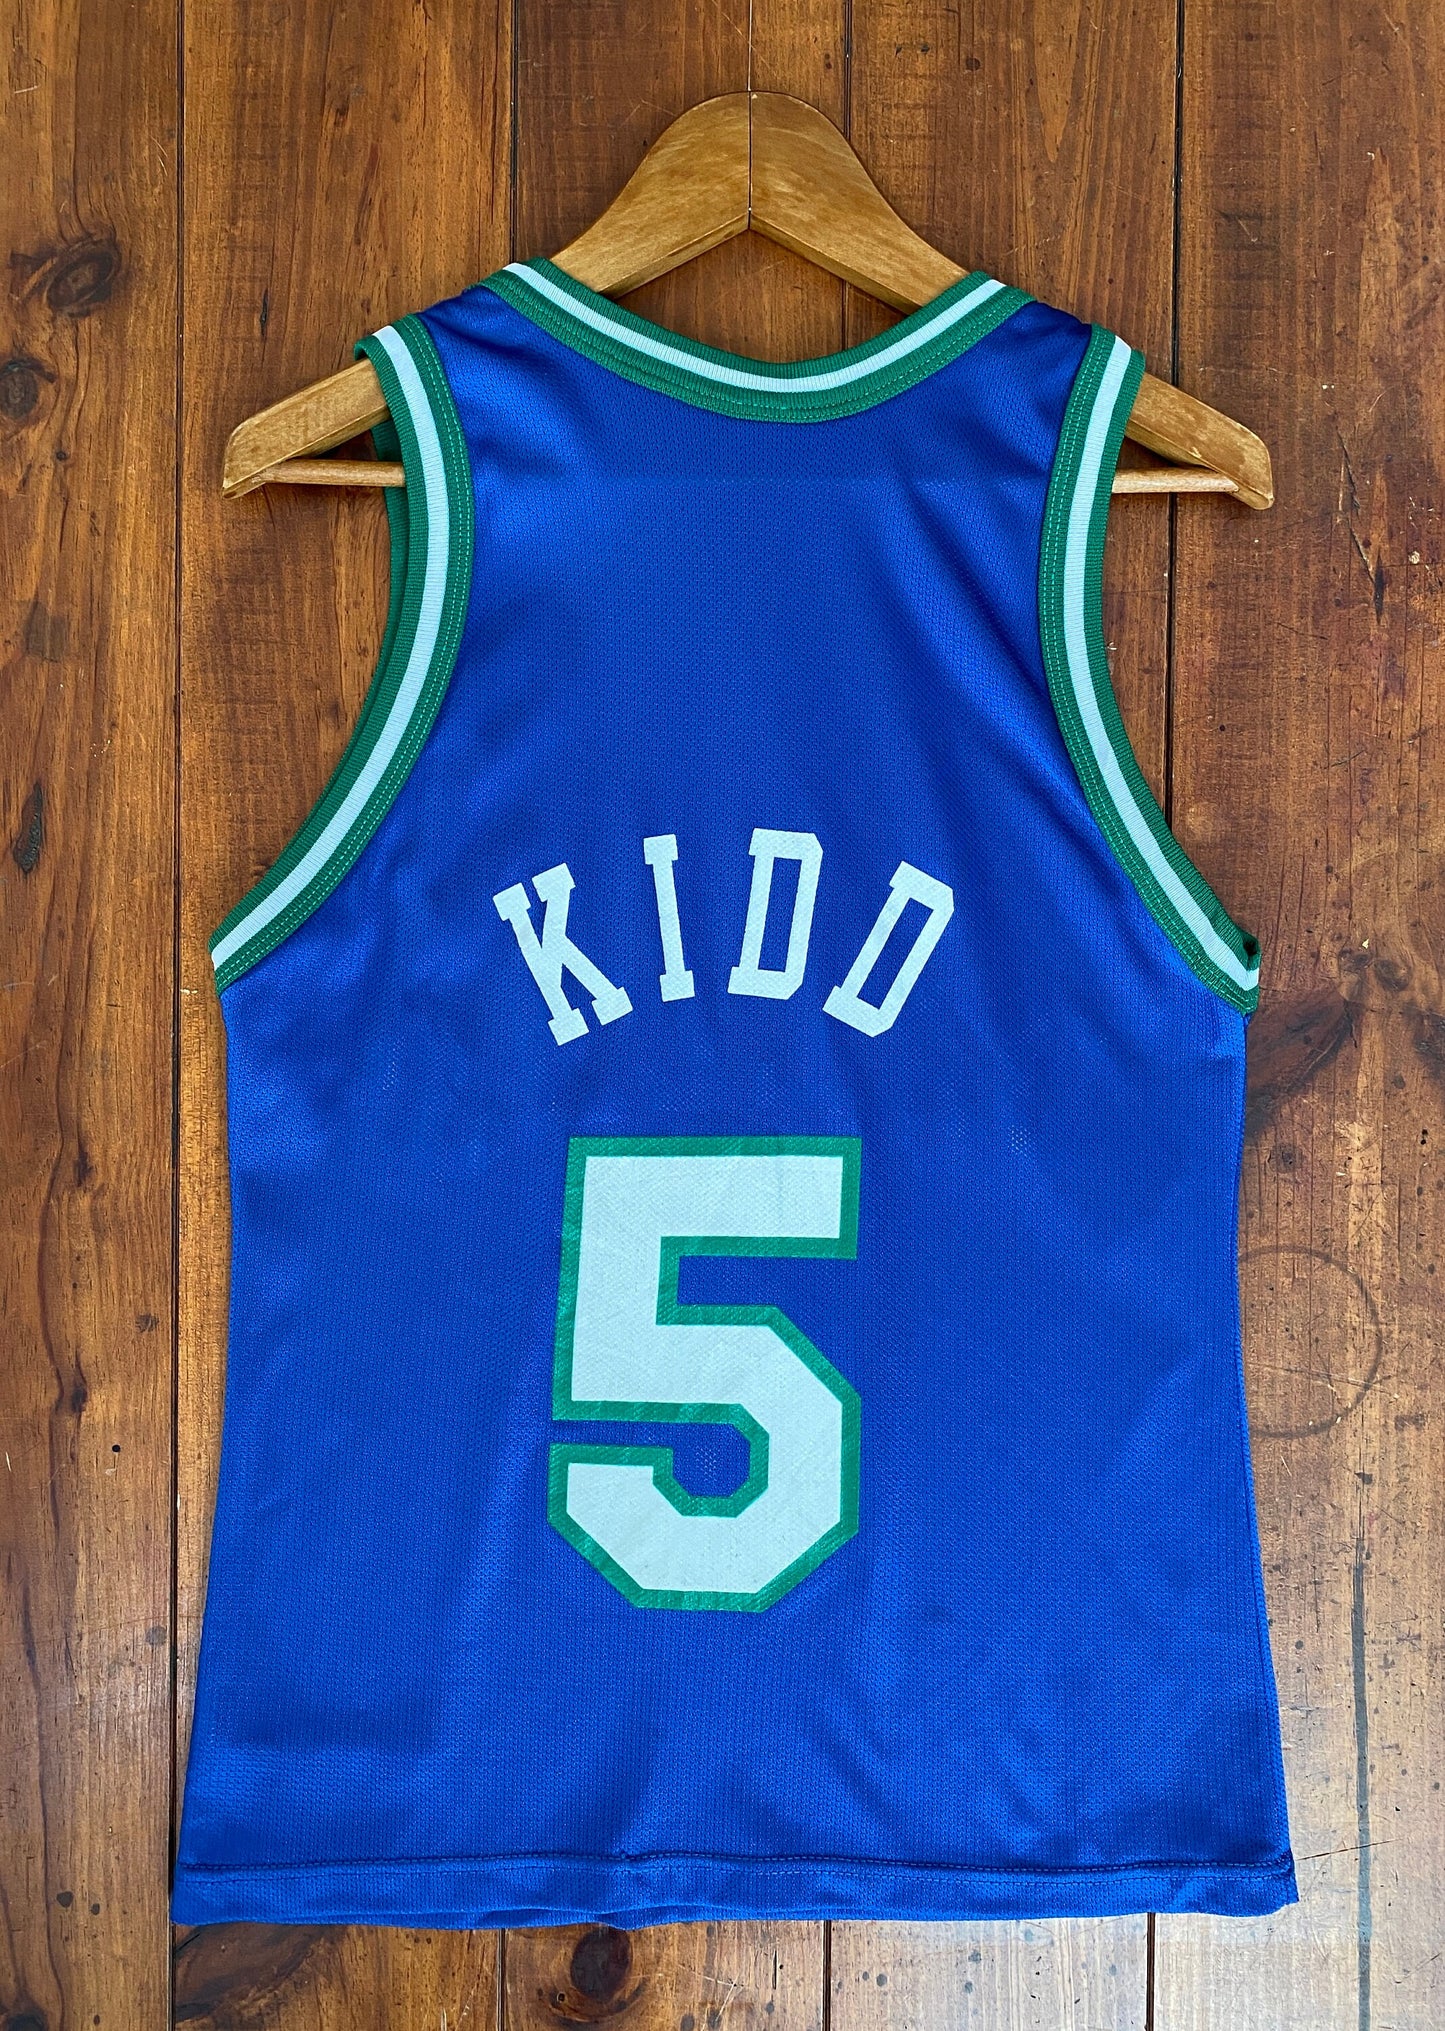 VTG 90s NBA Dallas #5 Kidd Jersey - Size 36, Made in USA by Champion